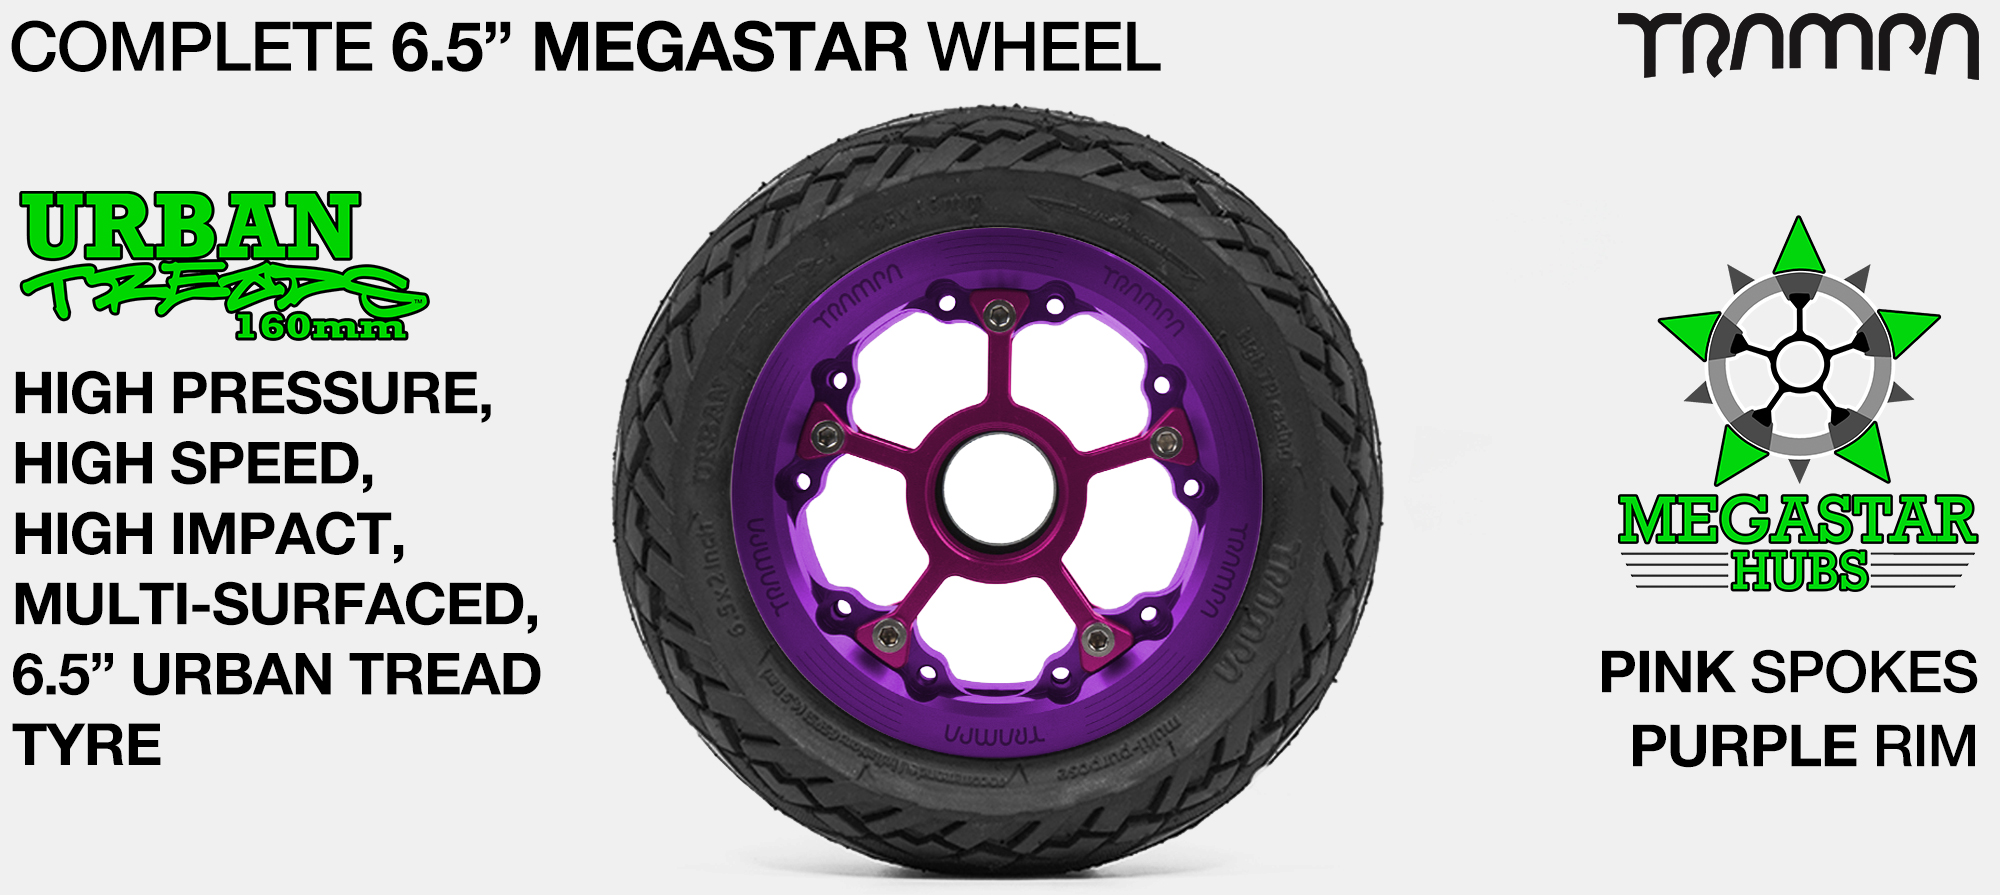 CENTER-SET MEGASTAR 8 Hub with PURPLE Rims & PINK Spokes with the amazing Low Profile 6.5 Inch URBAN Treads Tyres